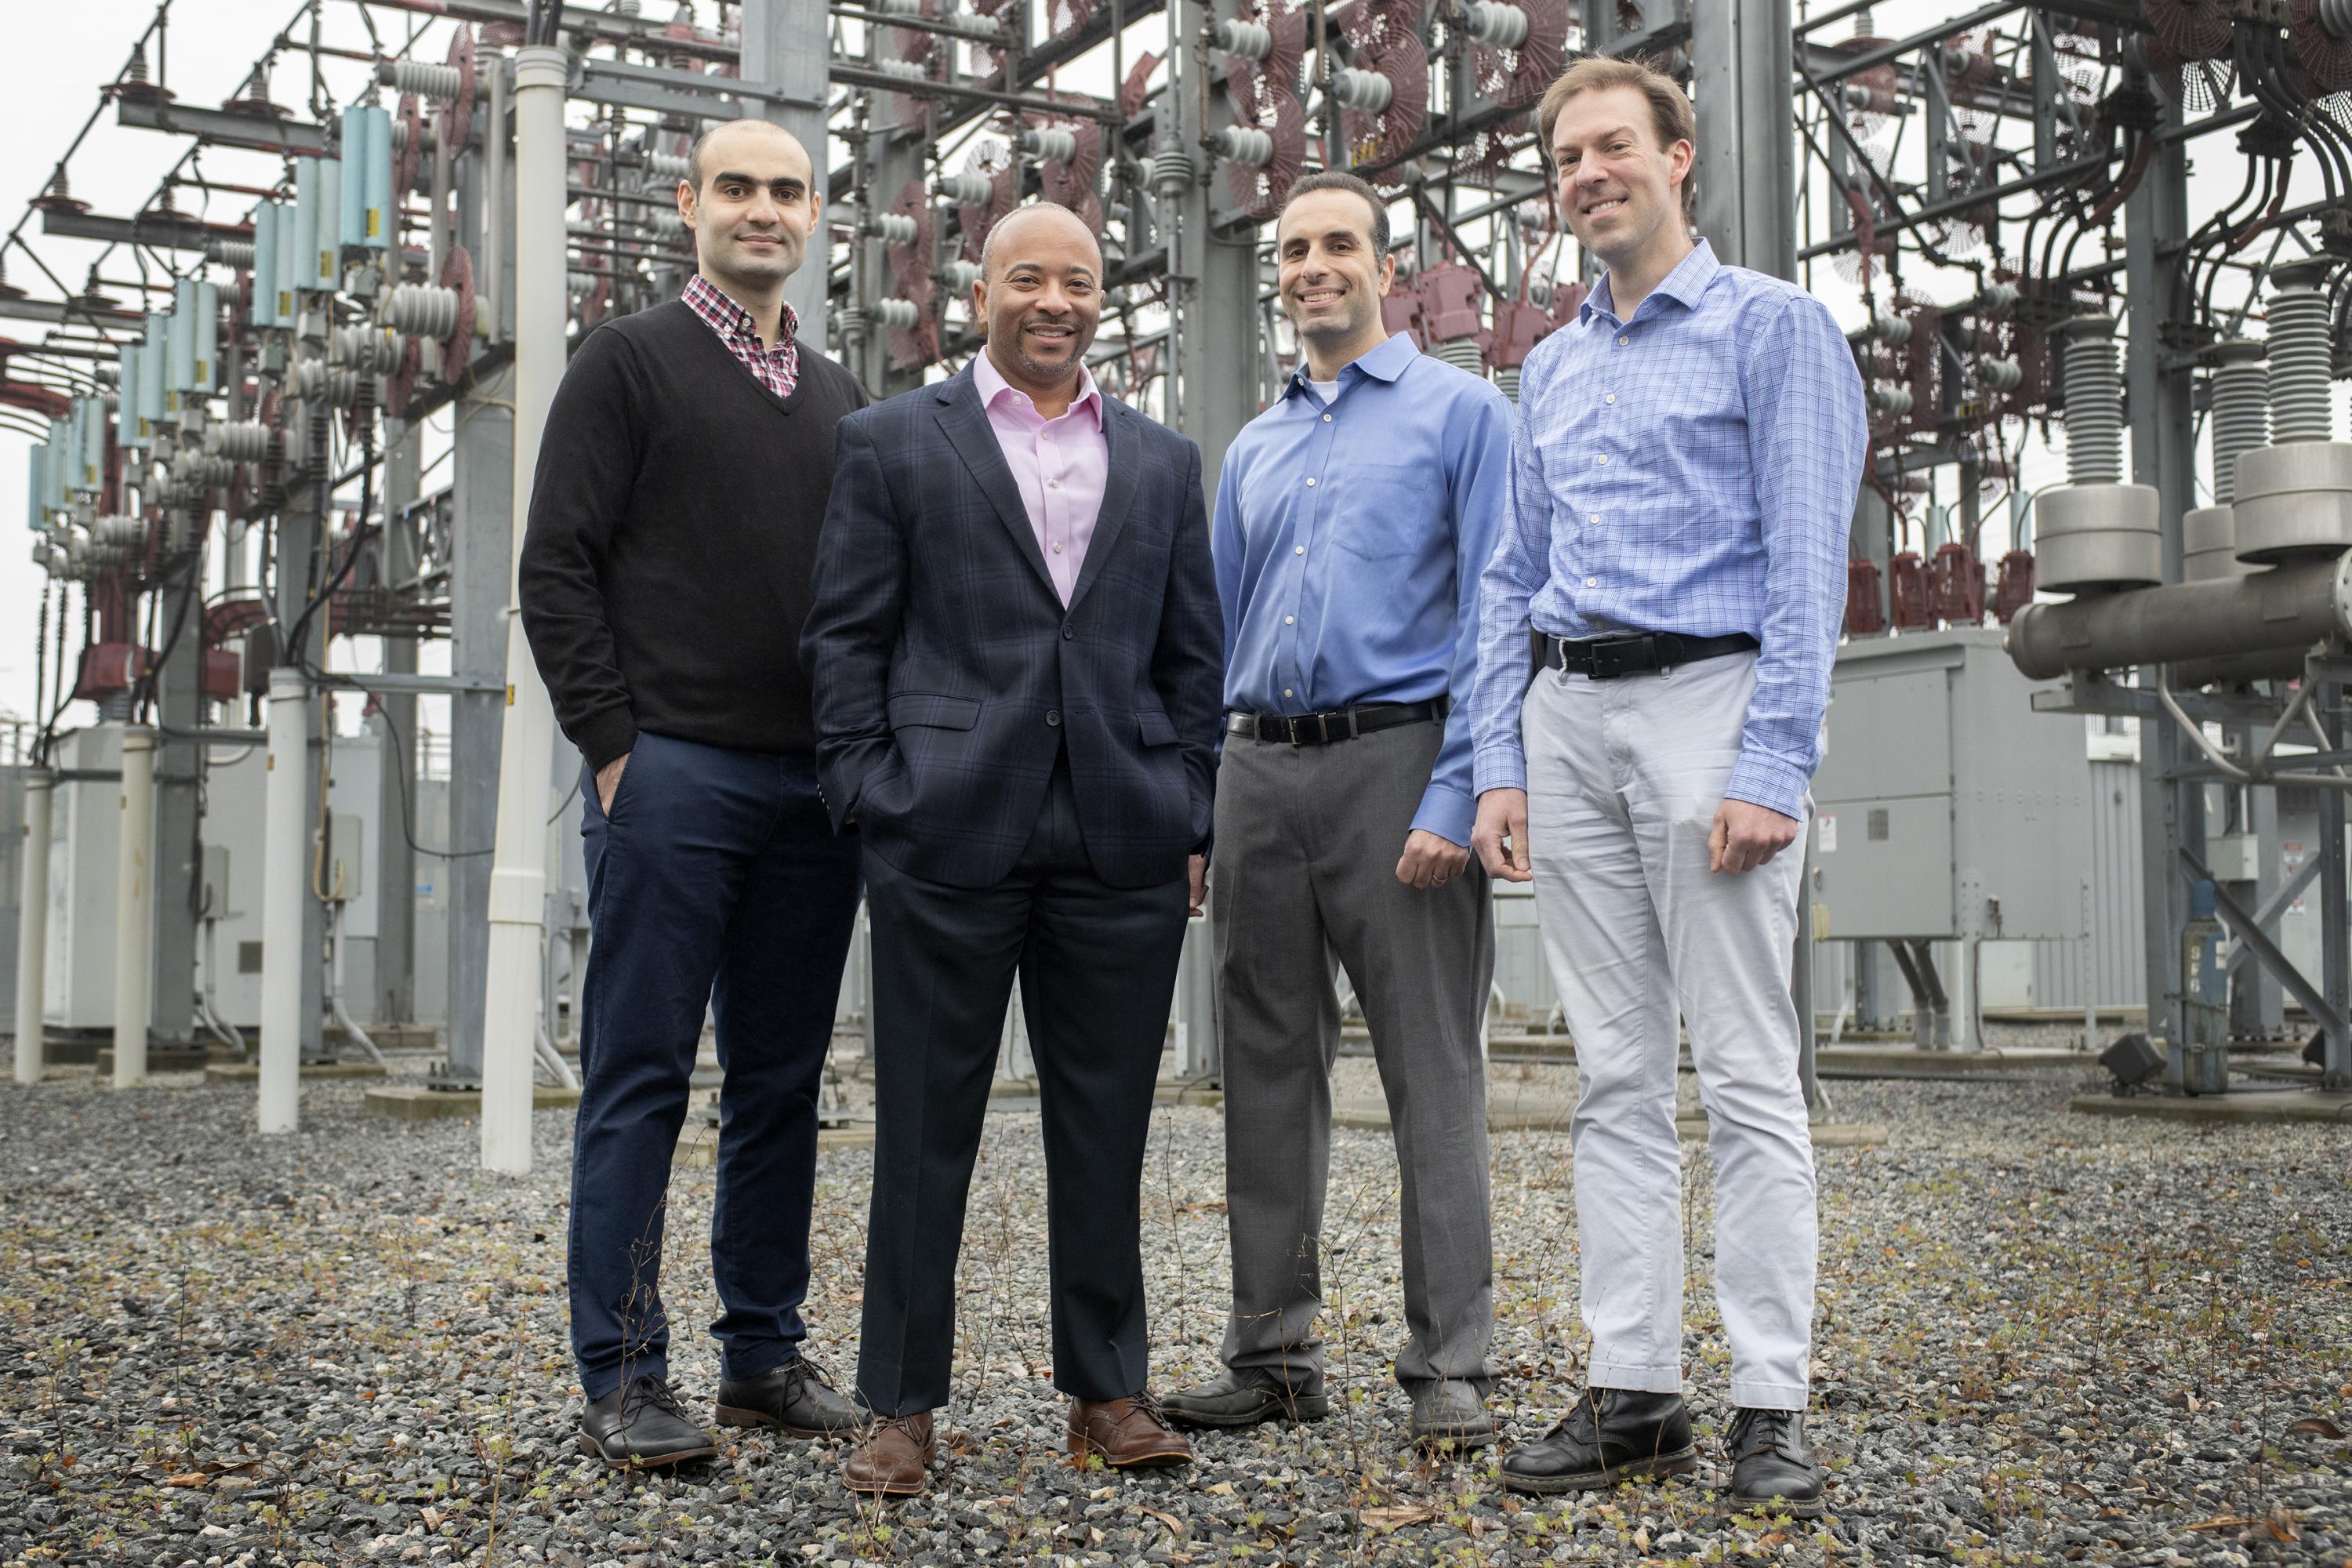 Georgia Tech researchers Tohid Shekari, Raheem Beyah, Morris Cohen, and Lukas Graber are shown with a substation that is part of the electric grid. The researchers have developed a new technique to secure the substations. (Image: Christopher Moore, Georgia Tech)